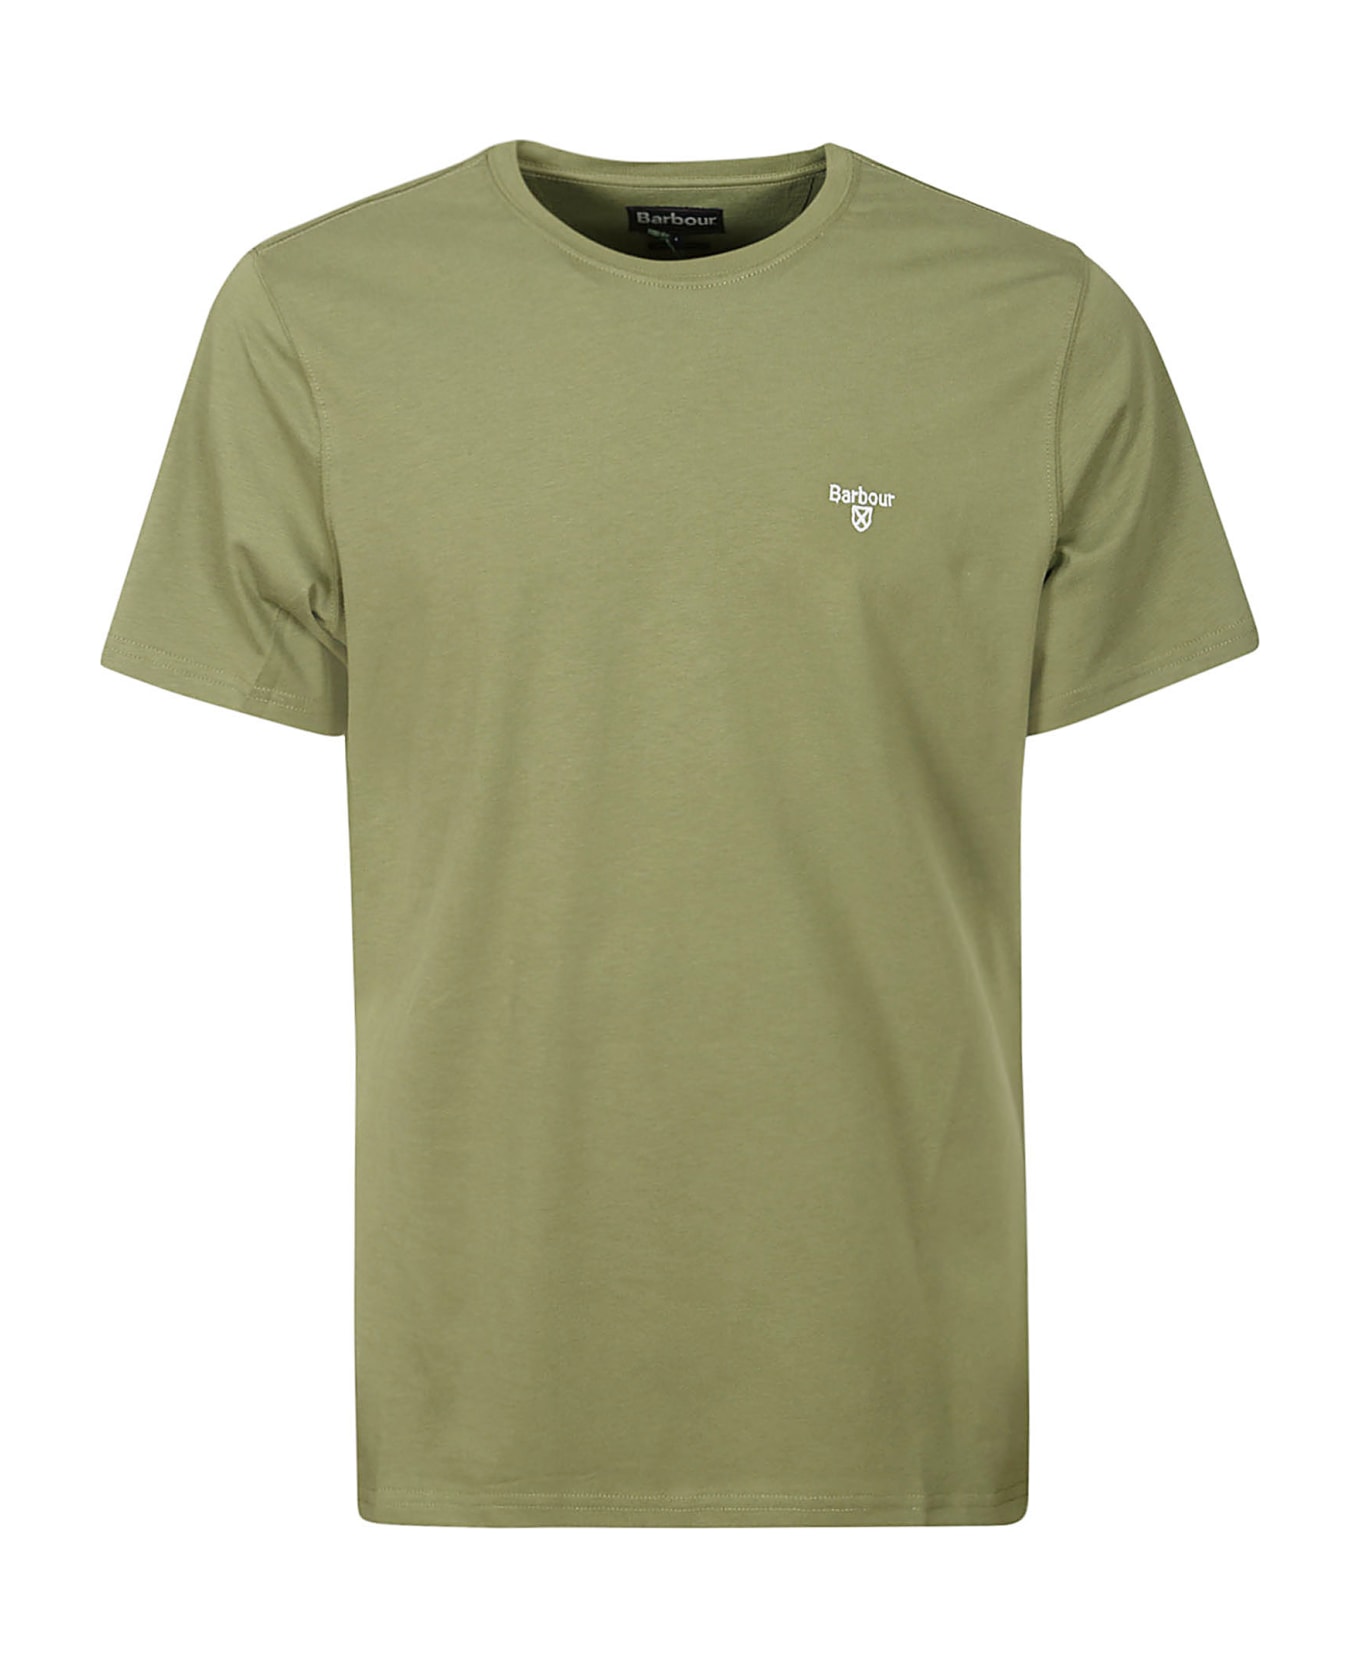 Barbour Essential Sports Tee - Burnt Olive